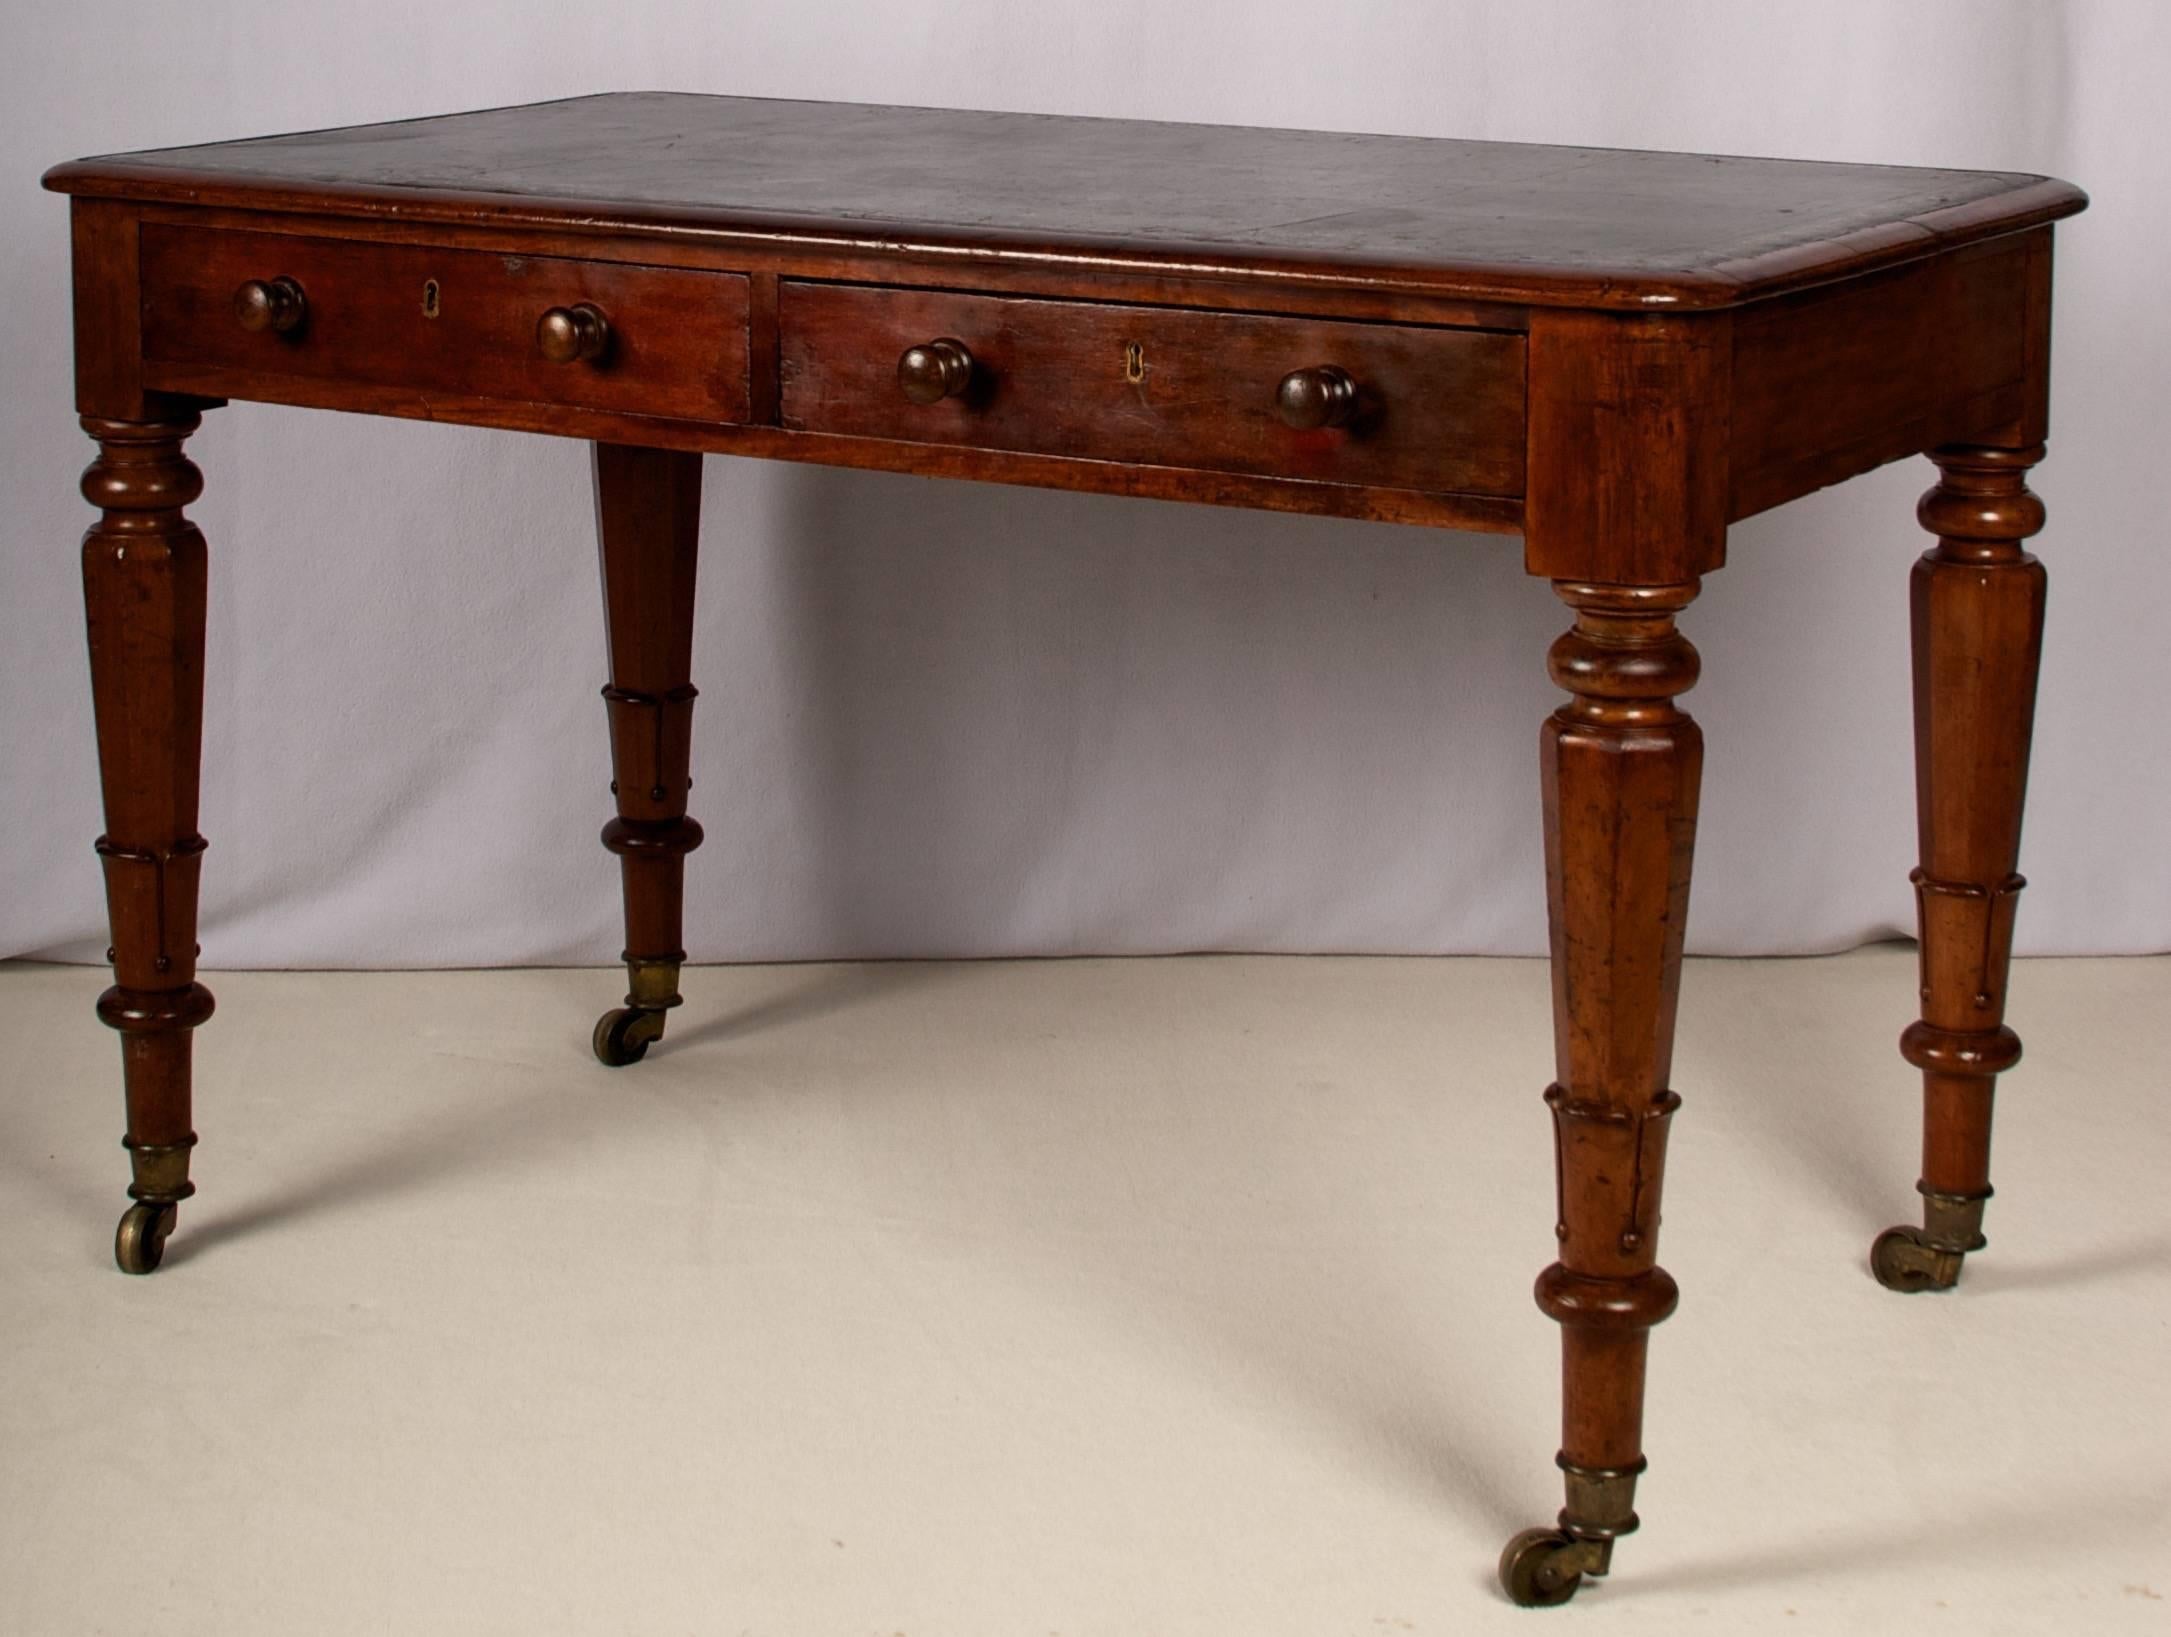 A very handsome English mahogany writing table/ desk that could also
be lovely as a bedside table, especially in a guest bedroom where a
piece like this can also be used for occasional writing.
The desk is of solid mahogany, crossbanded top edge